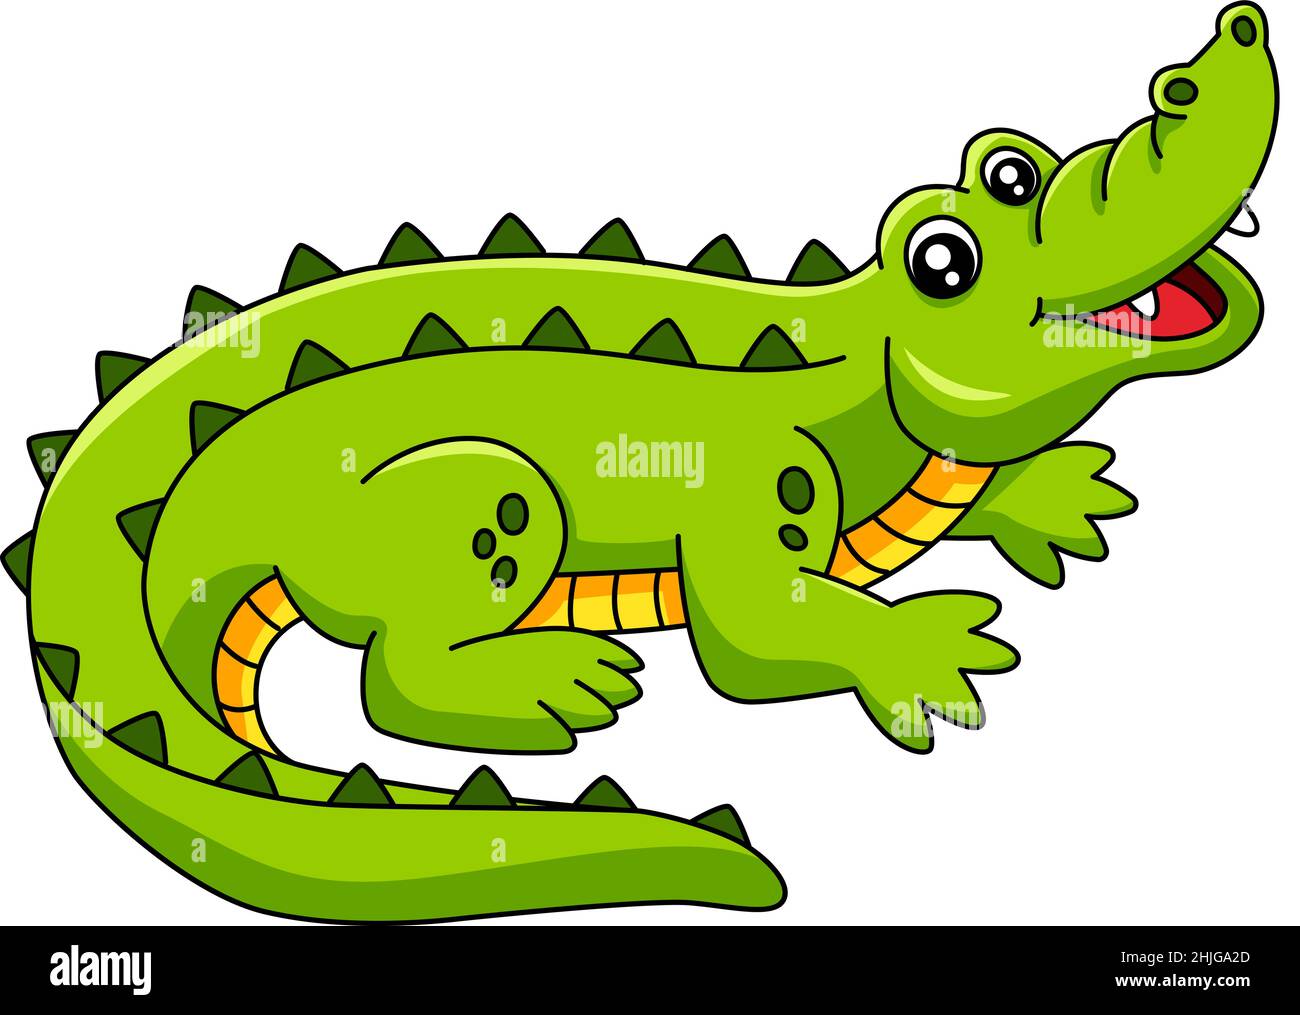 Gator art Cut Out Stock Images & Pictures - Alamy